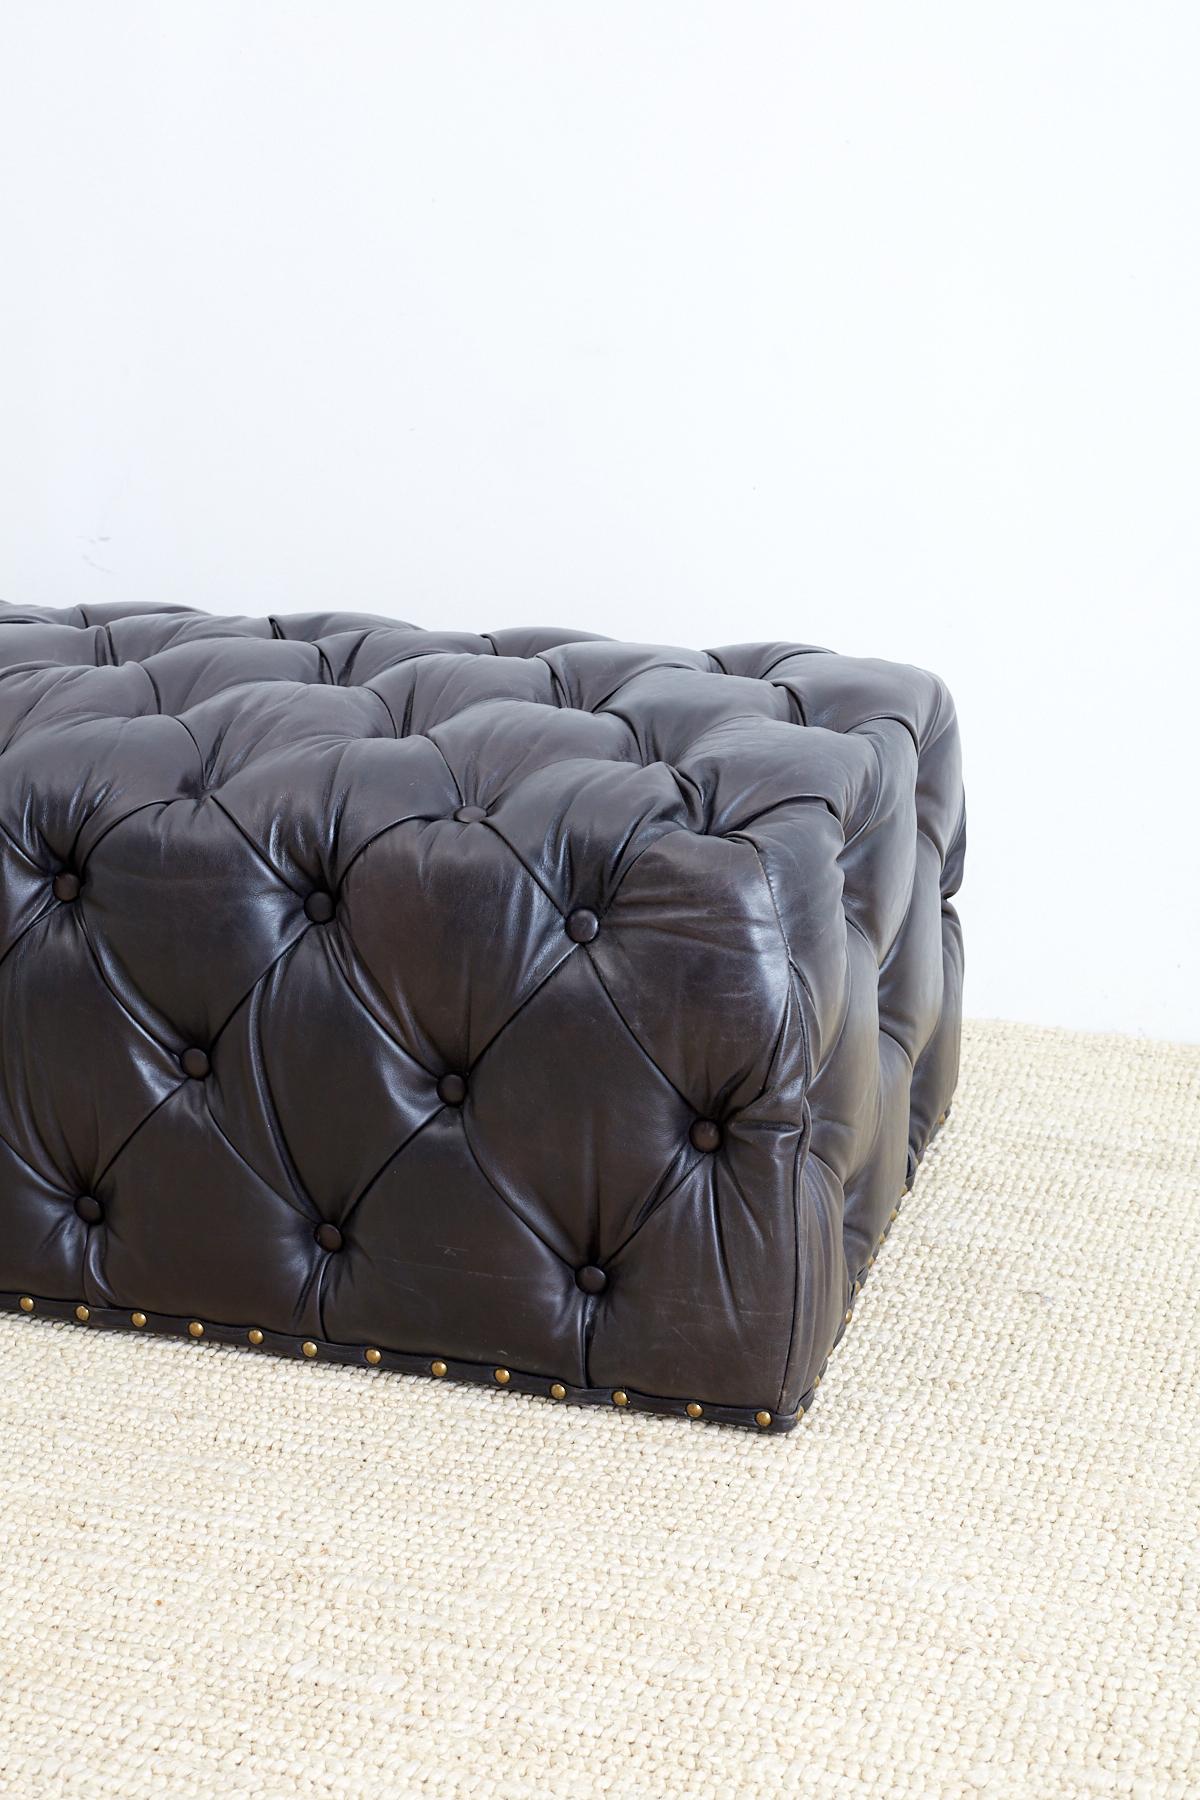 American Black Leather Tufted Ottoman or Bench